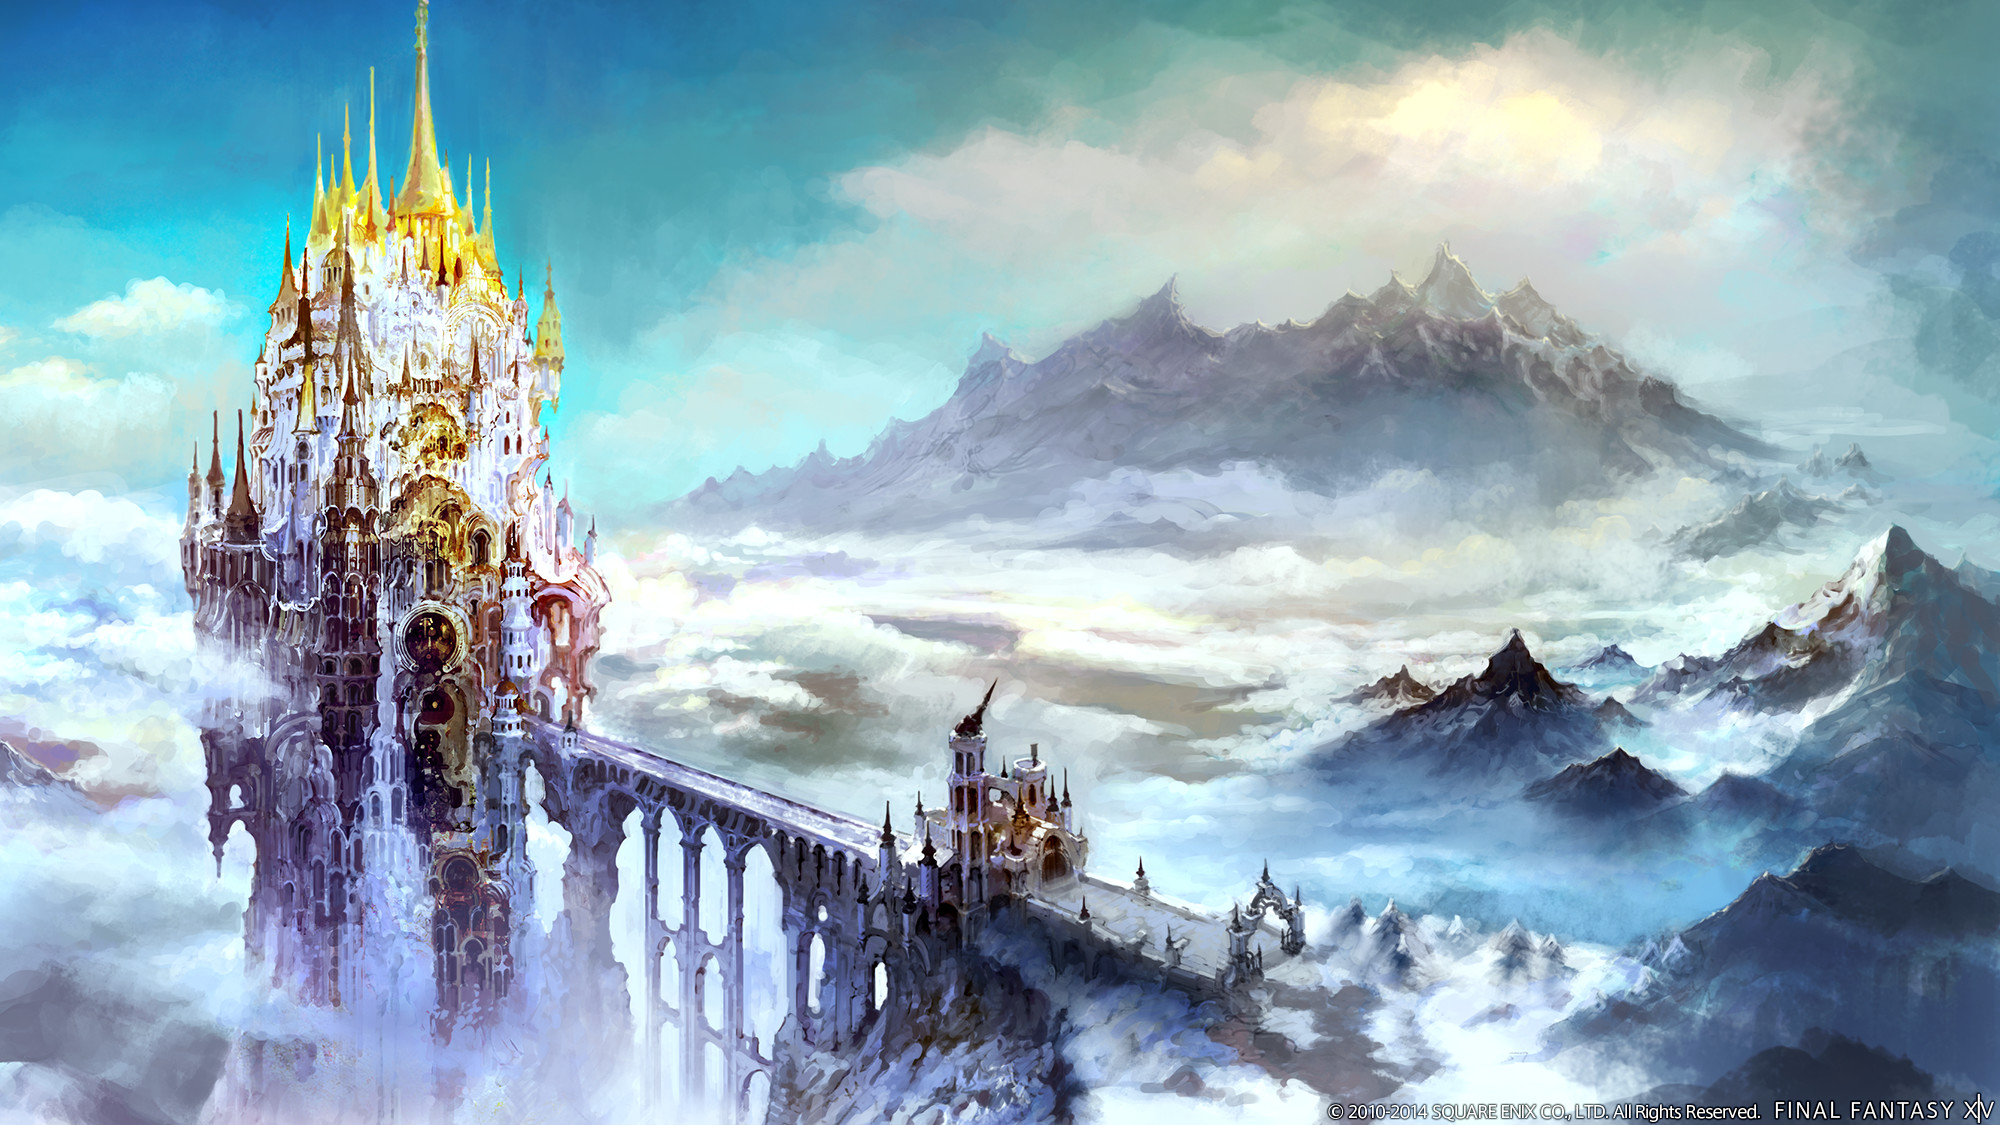 2000x1125 44 Final Fantasy XIV: A Realm Reborn HD Wallpapers | Backgrounds .